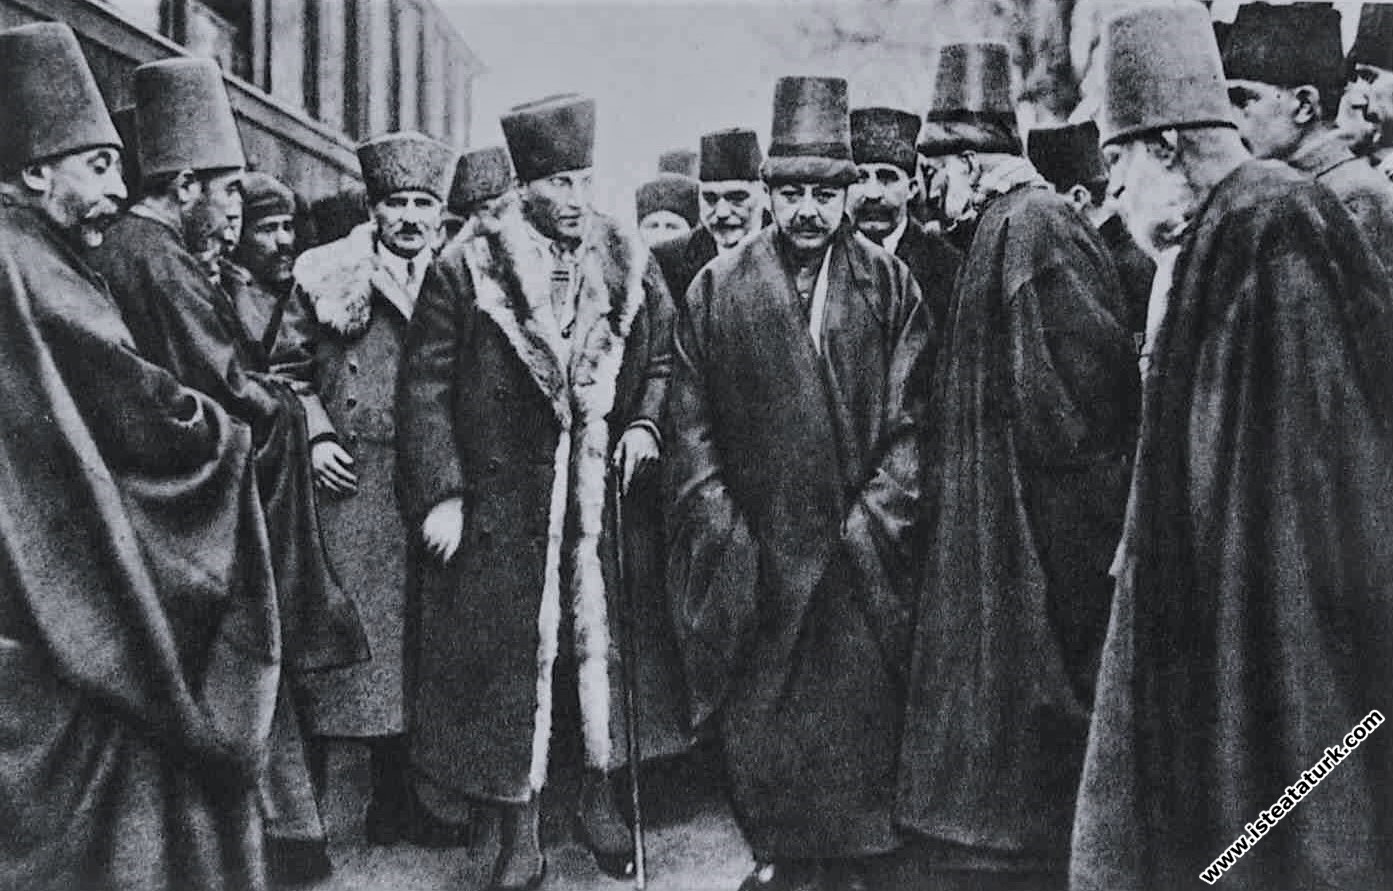 The welcome of Gazi Mustafa Kemal Pasha at the Mevlevi Lodge during his visit to the Mevlana Tomb and Lodge in Konya. (22.03.1923)